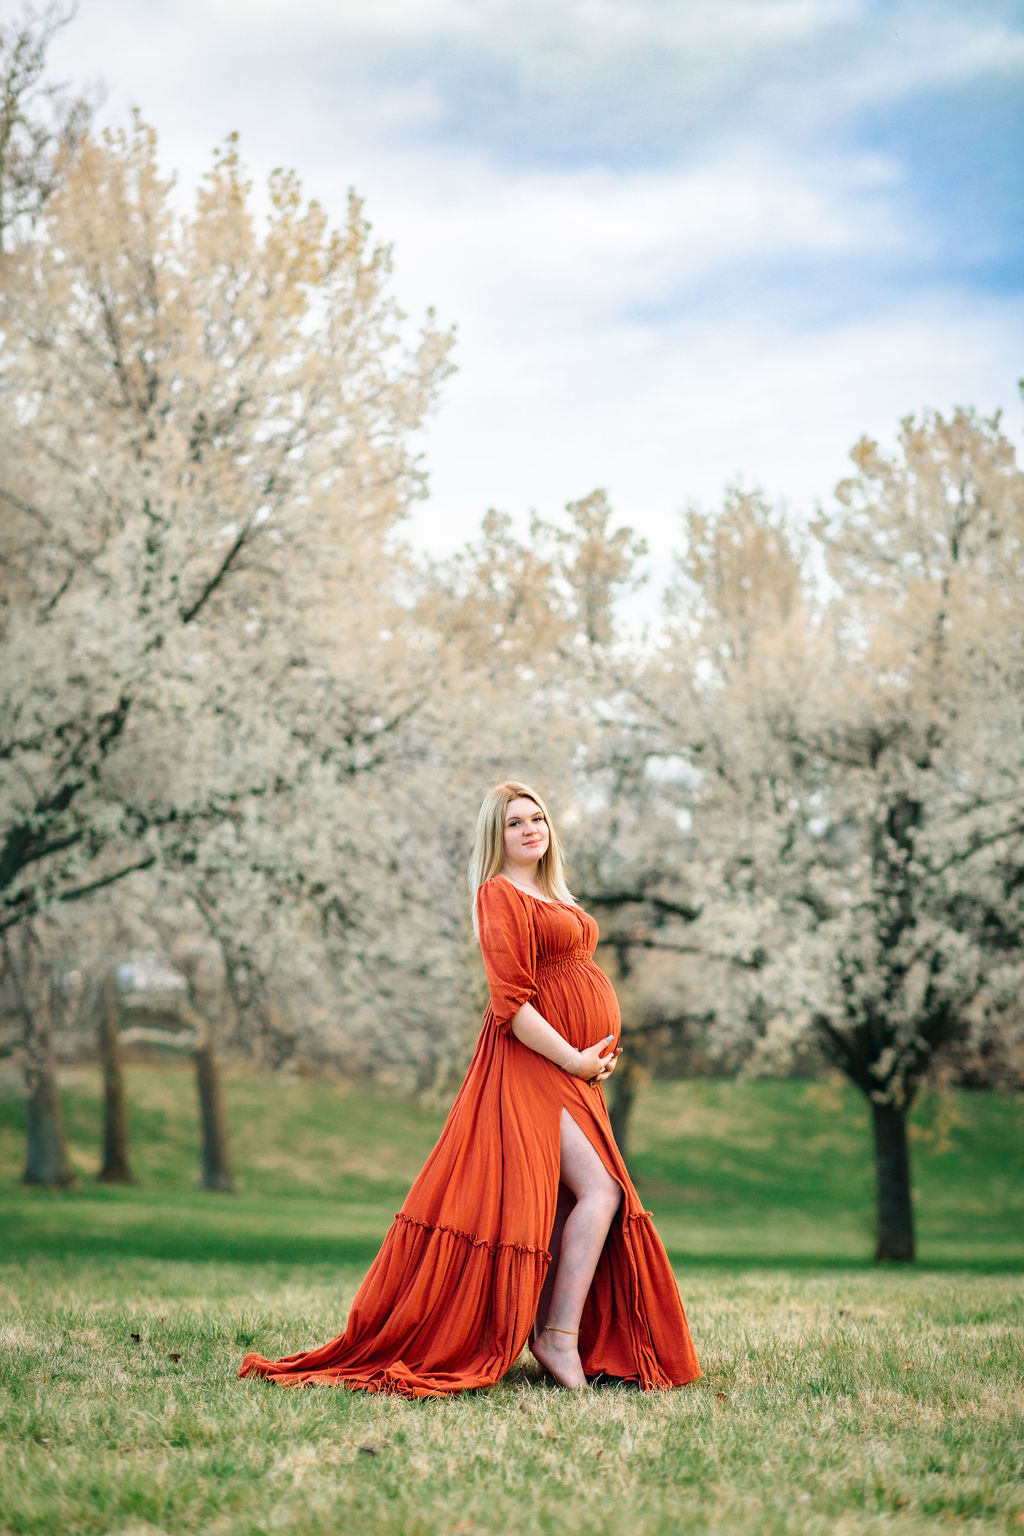 A mother to be in a red maternity gown stands in a field surrounded by white blooming trees shenandoah chiropractic